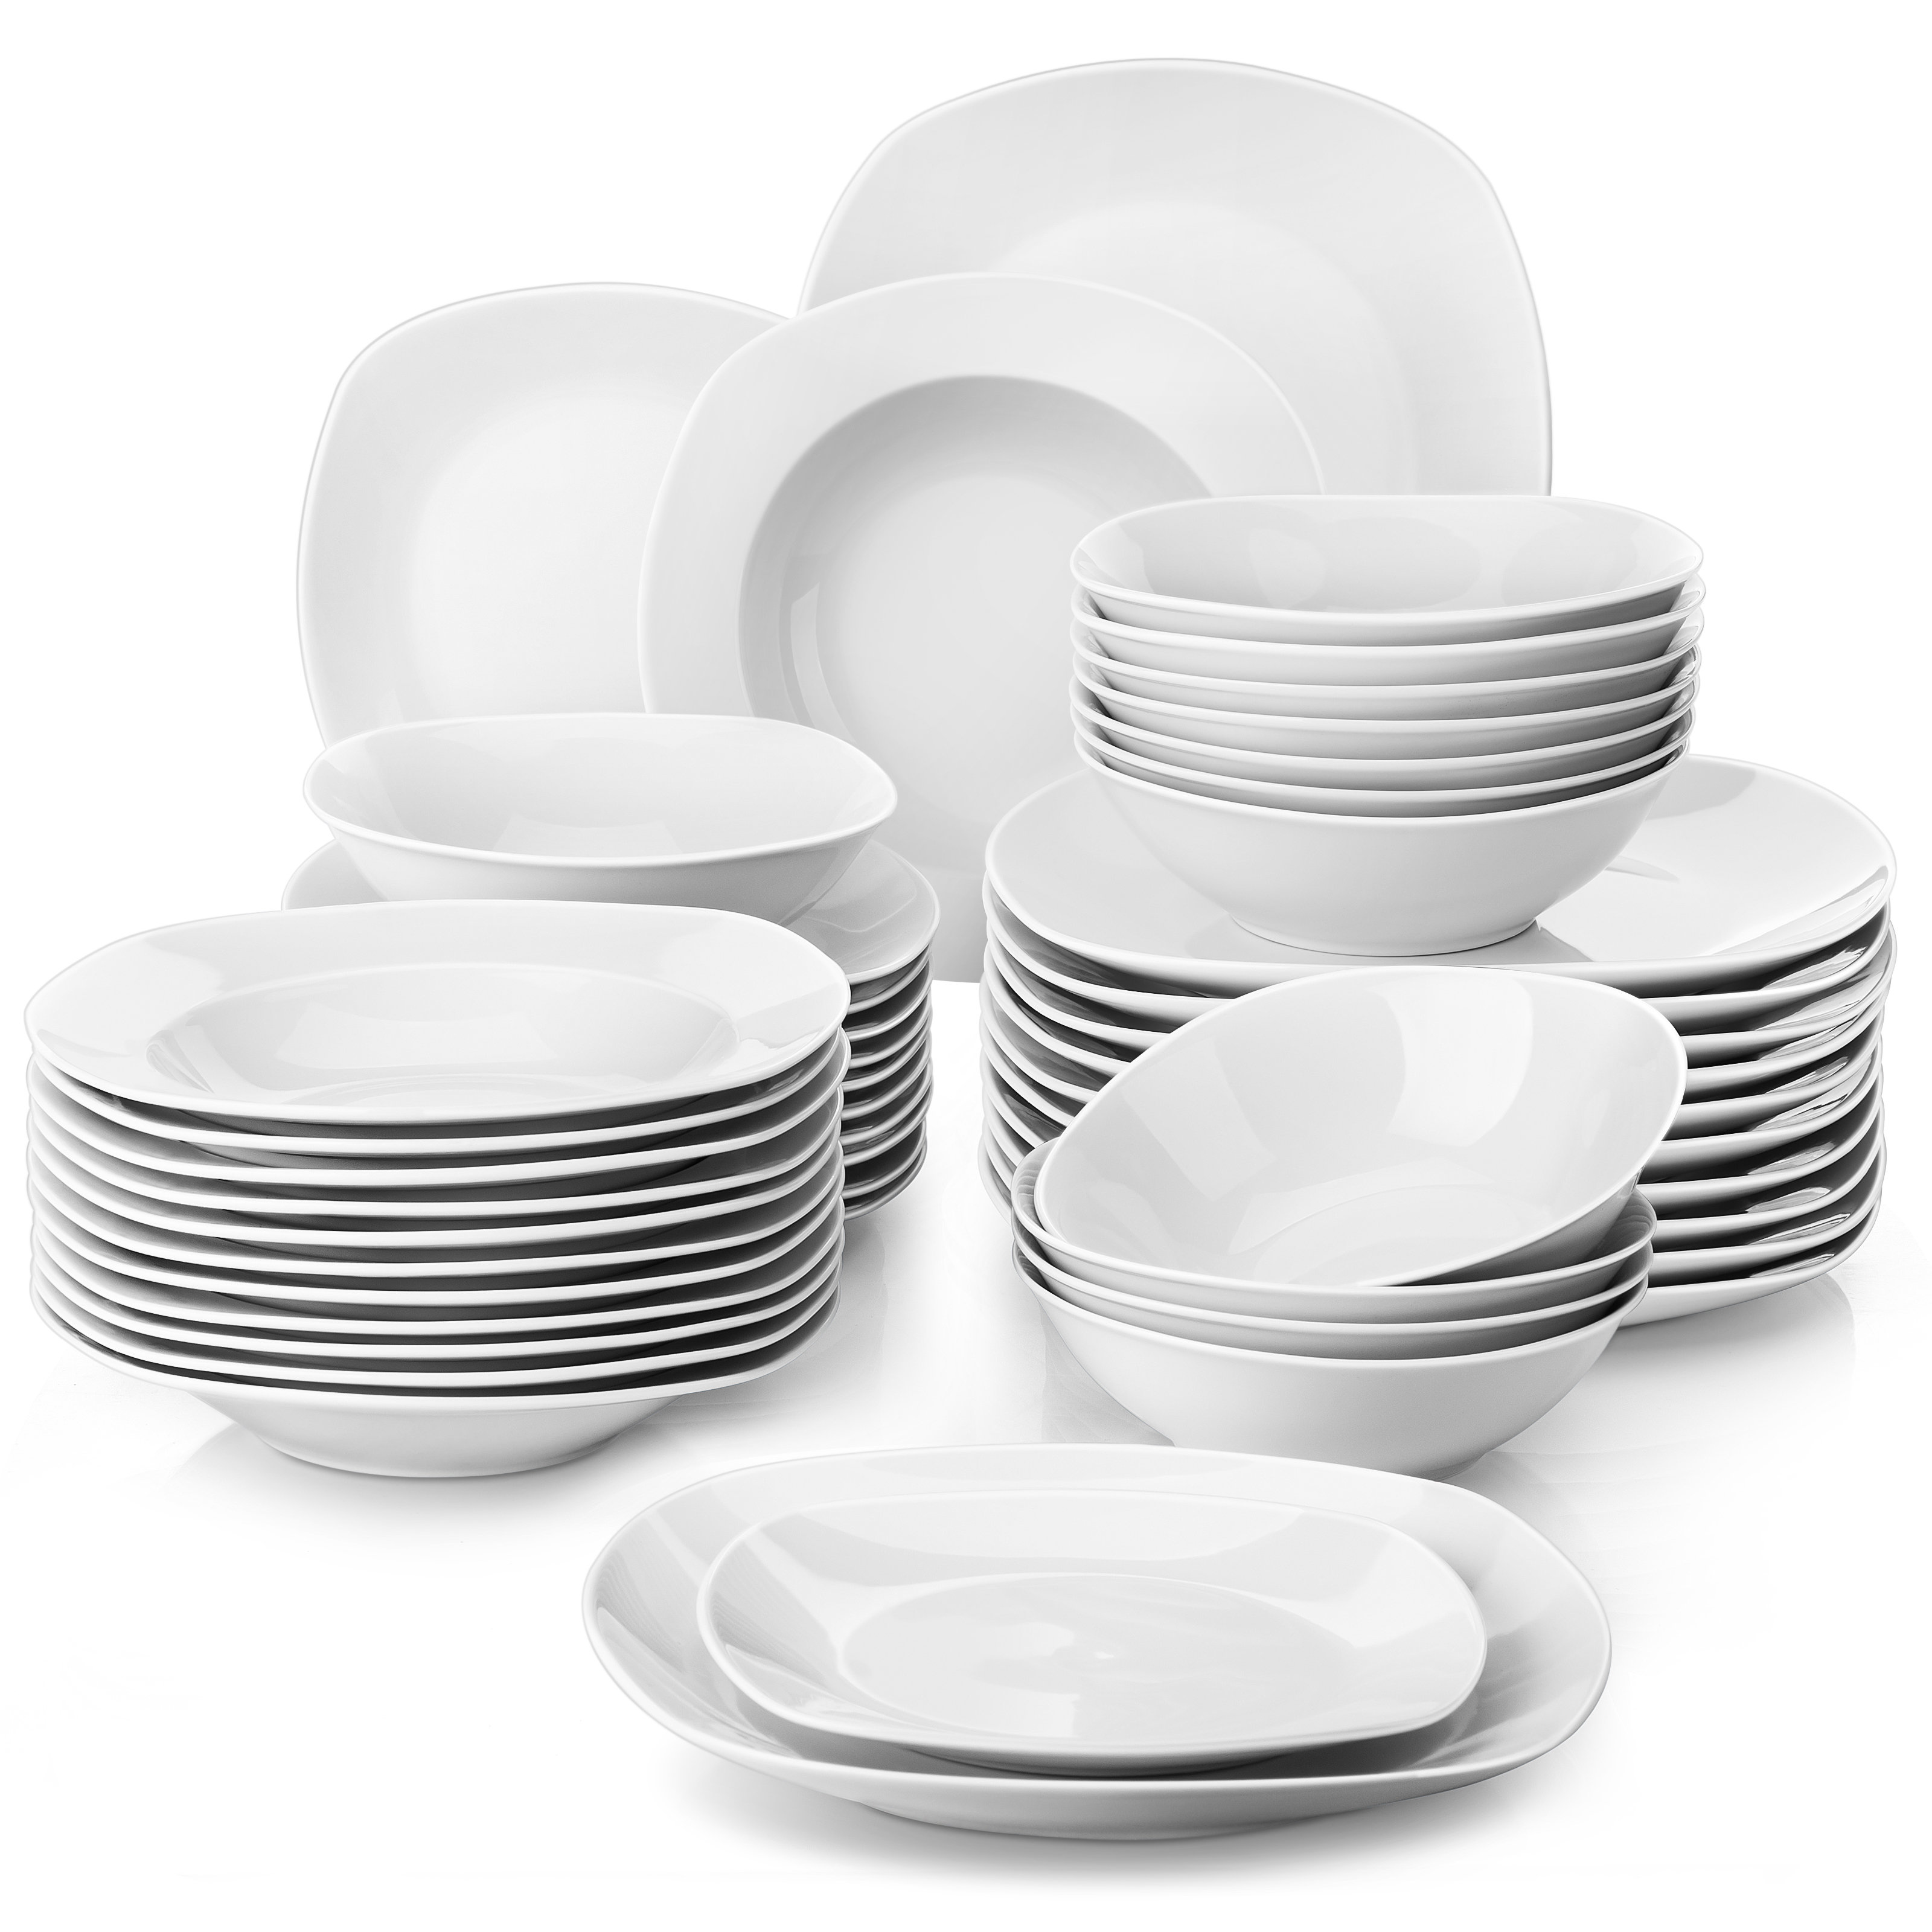 MALACASA Square Dinnerware Set, 40-Piece Porcelain Gray White Dinner Sets,  Dish Set Dinner Plates, Soup Bowls and Dessert Plates, Egg Cups and Coffee